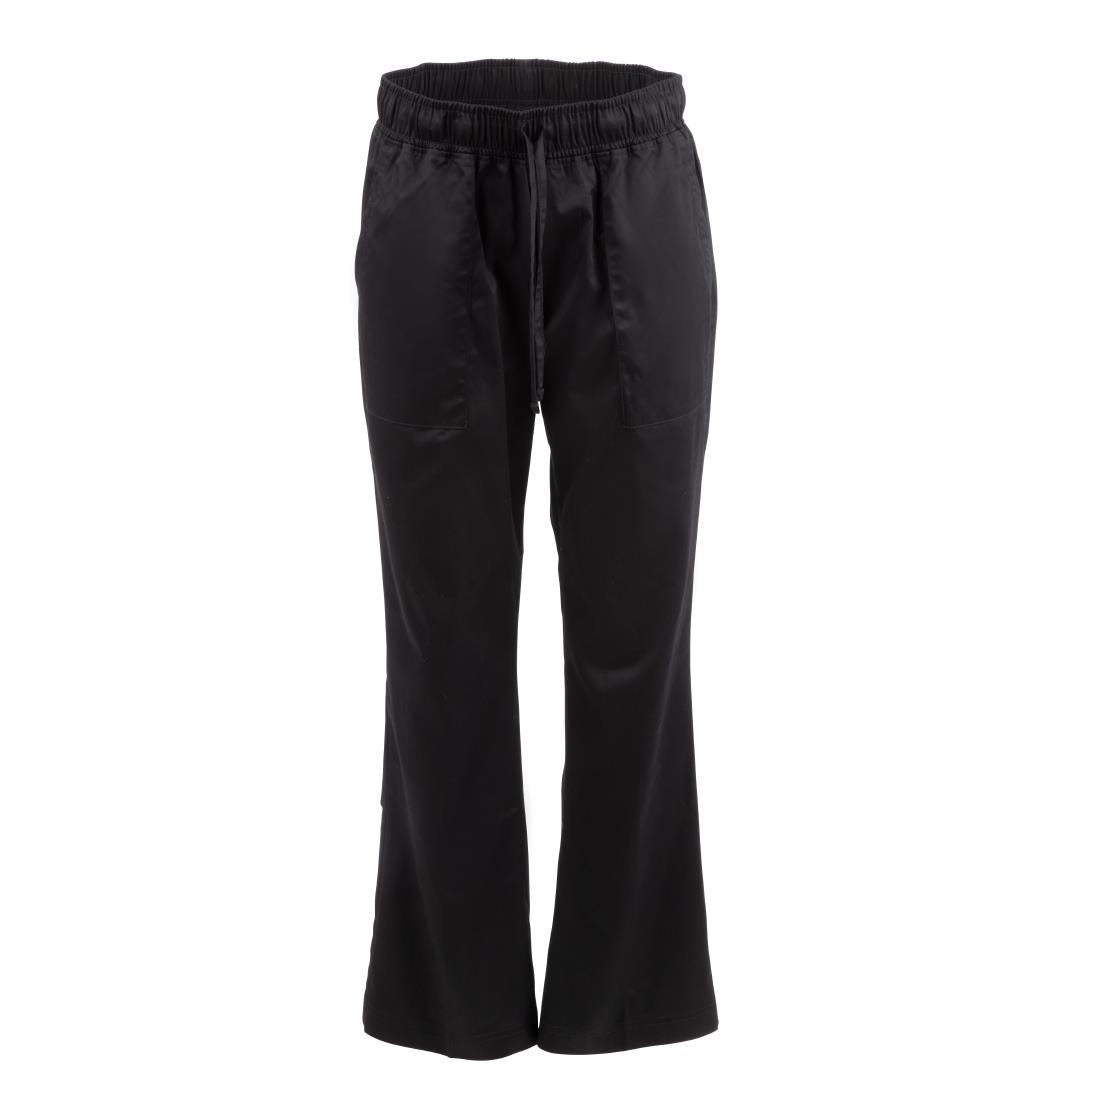 A431-XL Chef Works Womens Executive Chef Trousers Black XL